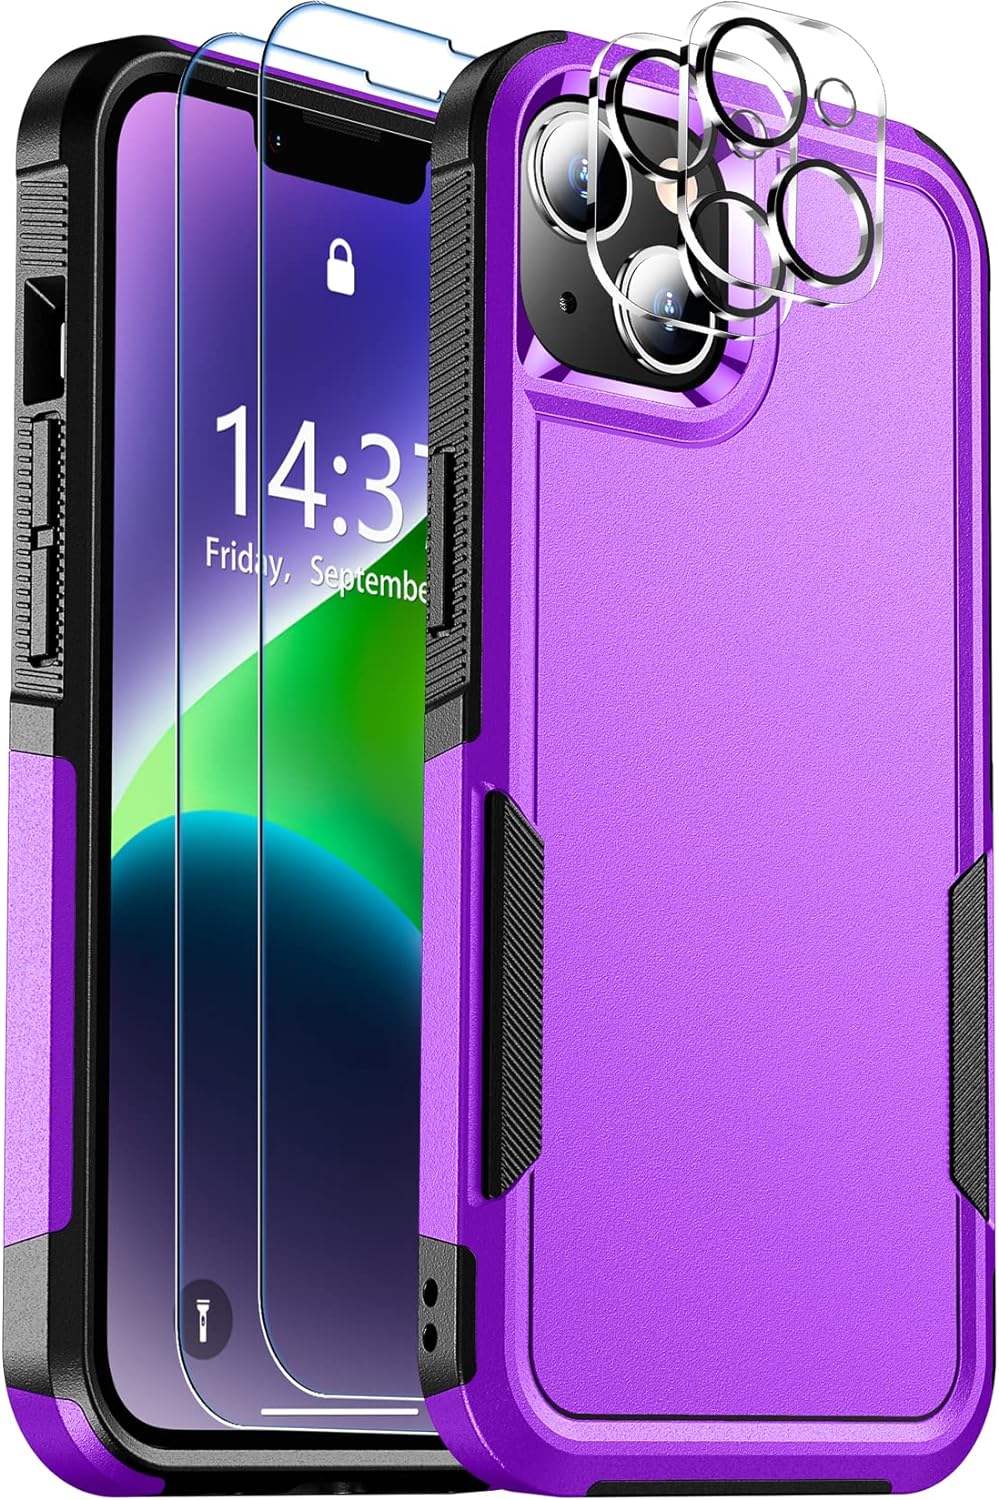 SPIDERCASE for iPhone 14 Case, [15 FT Military Grade Drop Protection][Non-Slip] [2+Tempered Glass Screen Protector][2+Tempered Camera Lens Protector] Heavy Duty Full-Body Shockproof Case, Deep Purple